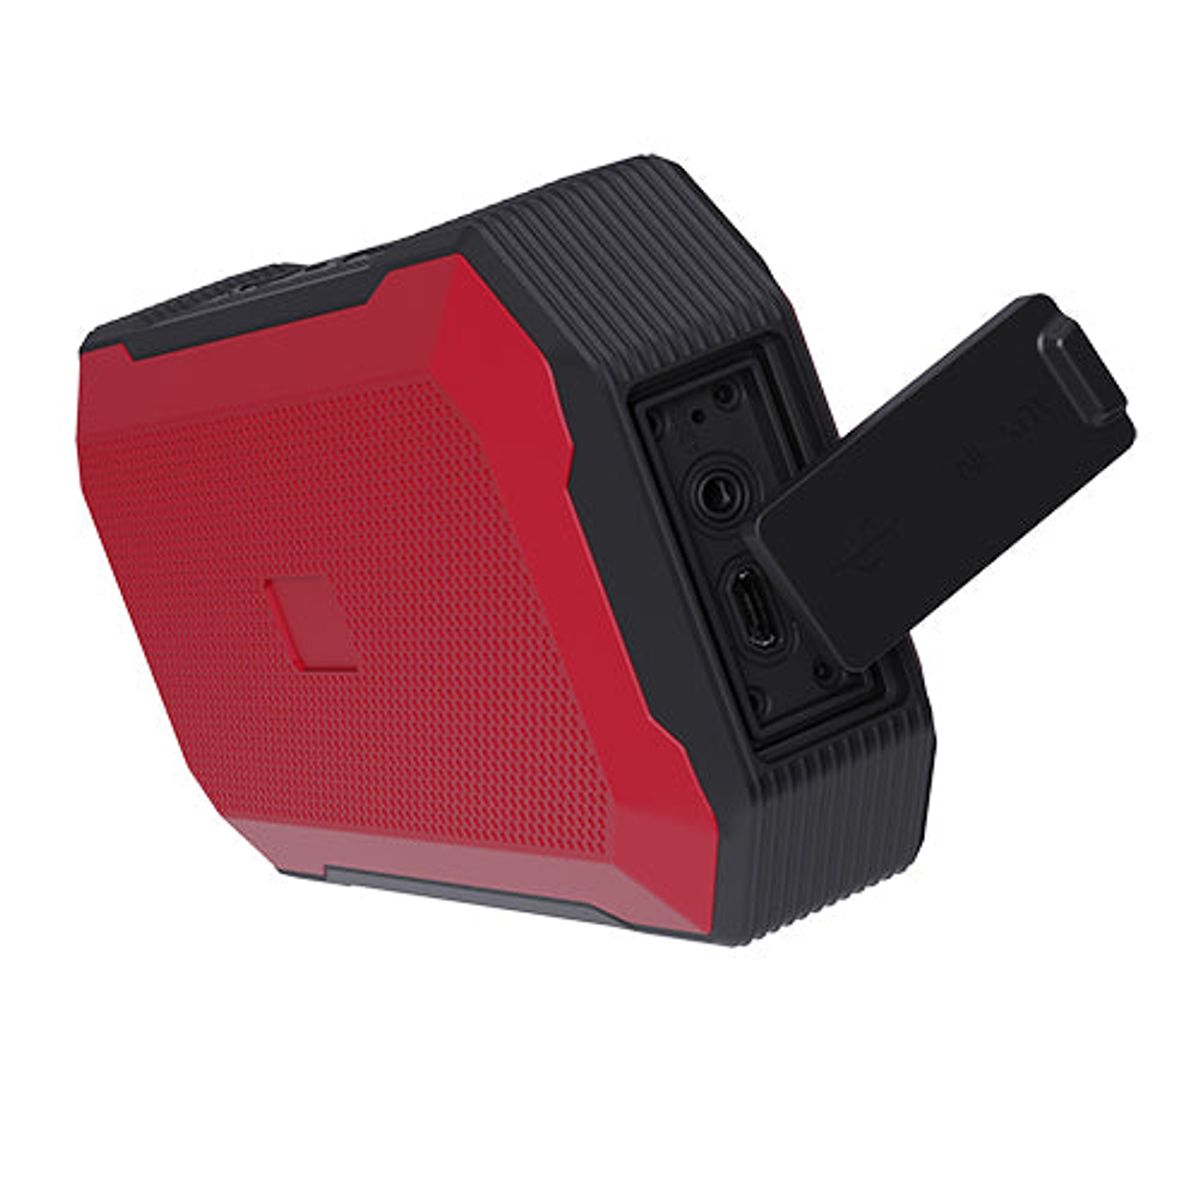 Photos - Speakers Supersonic SuperSonic® DURO Portable Bluetooth Speaker, SC-1454IPX - Red S